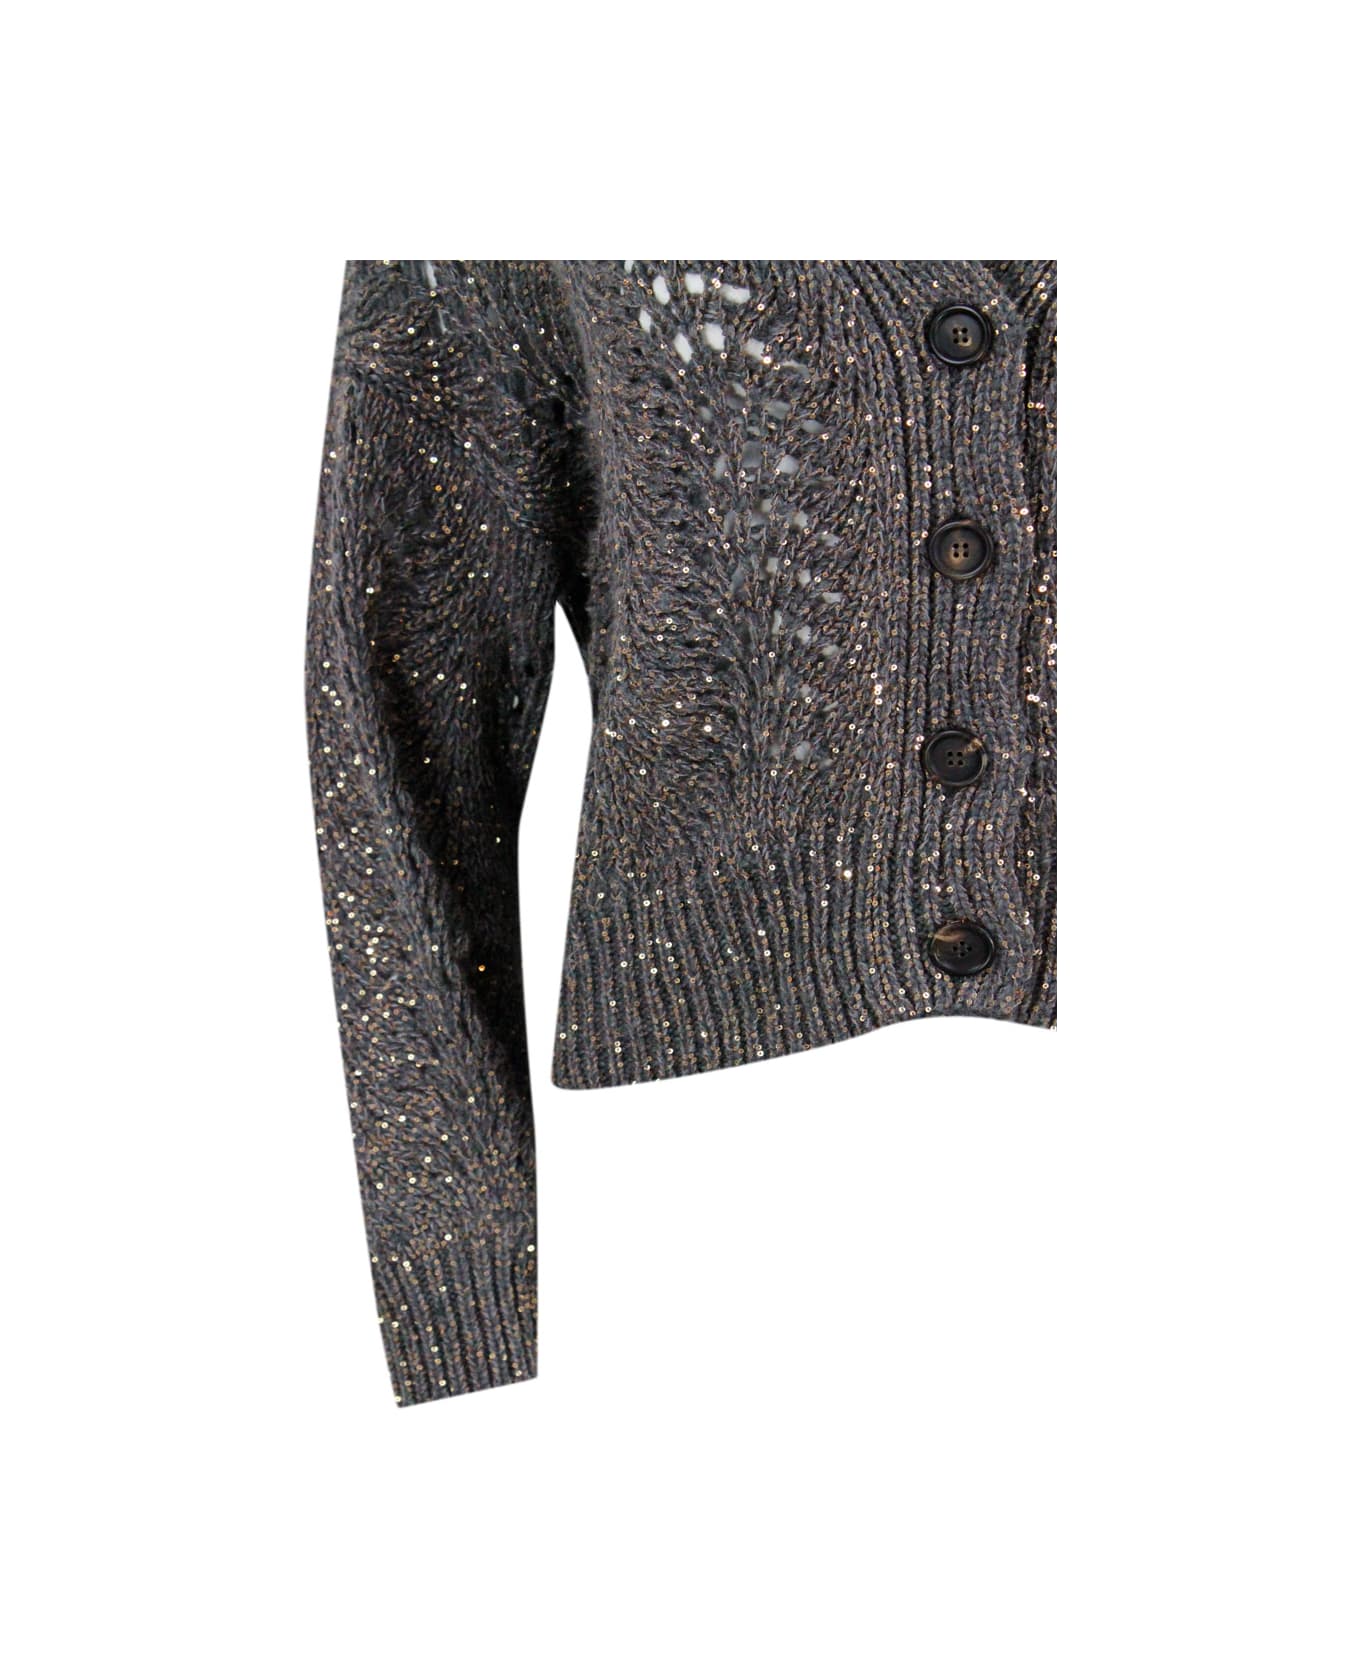 Brunello Cucinelli Cardigan Sweater With Buttons In Precious And Refined Feather Cashmere Embellished With A Dazzling Yarn With Sequins For A Shiny And Three-dimensional - Grey カーディガン